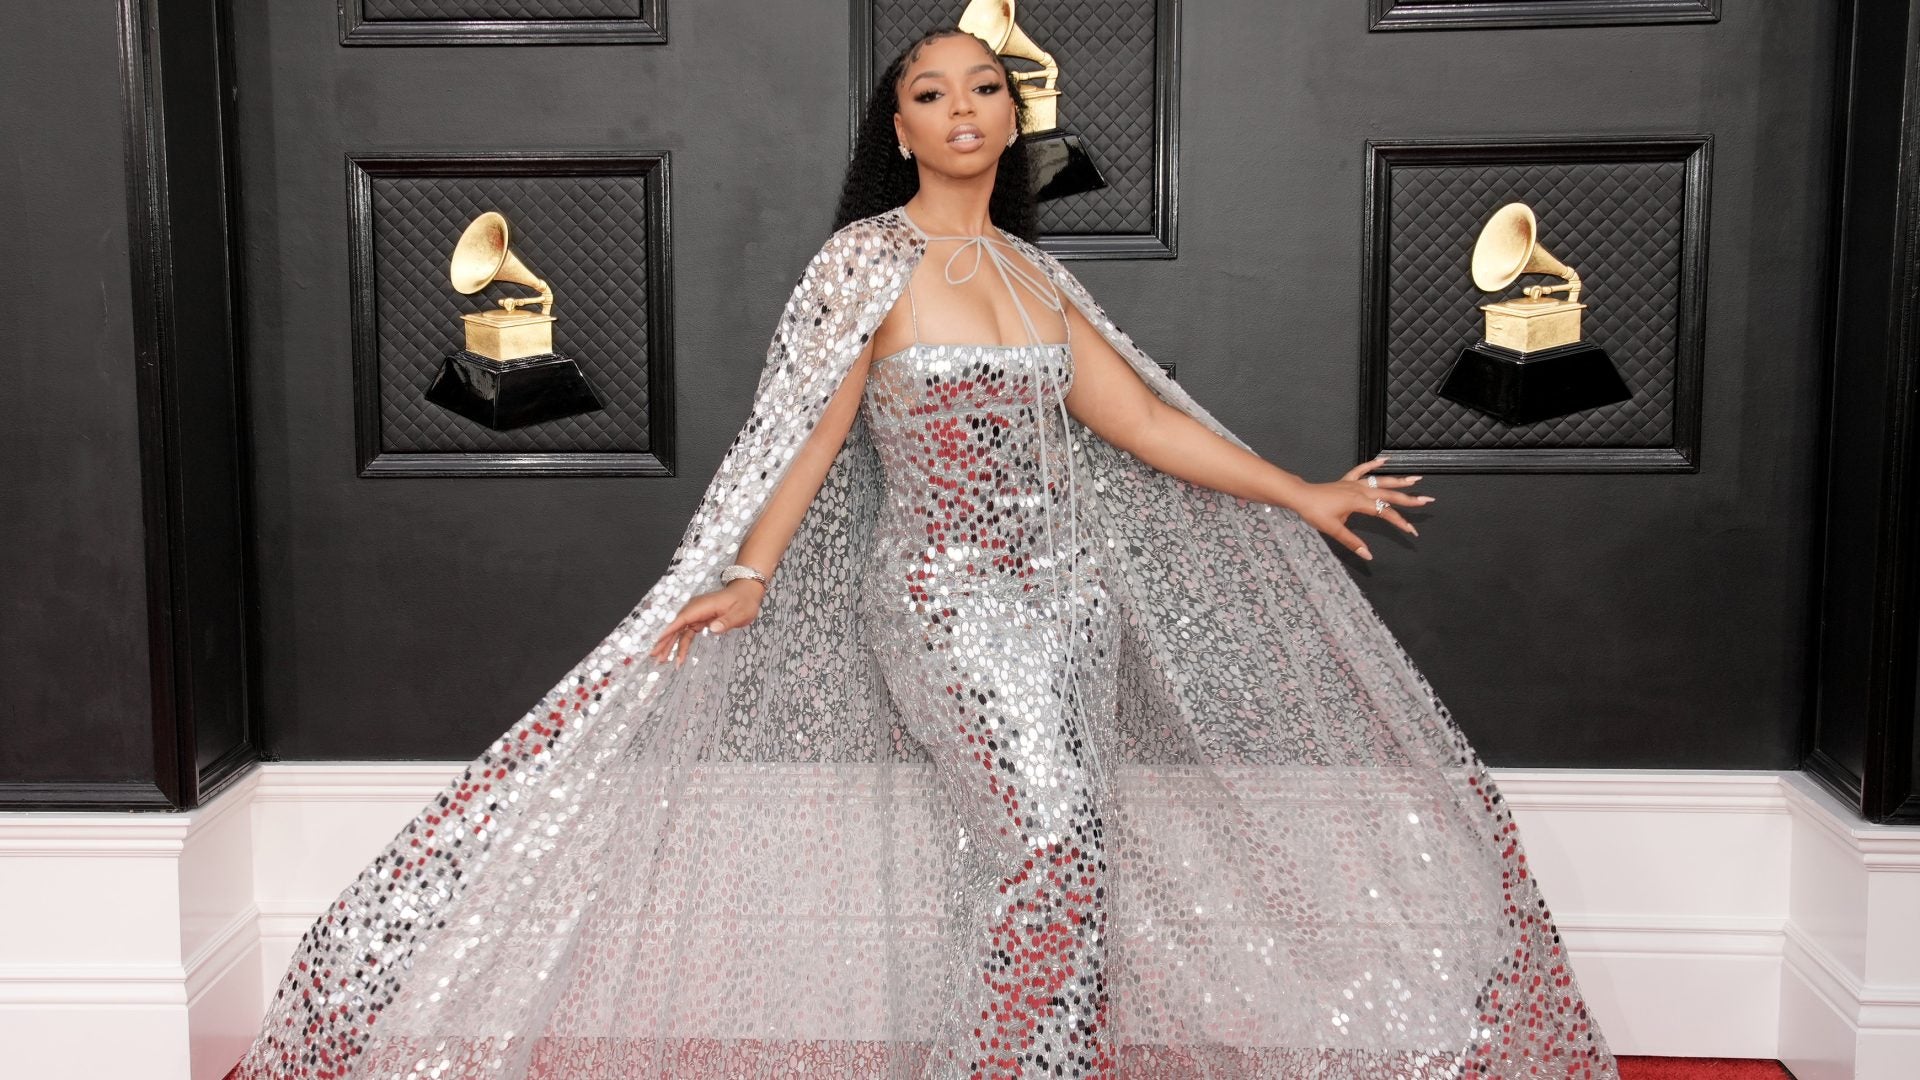 Chloe Bailey Was Decked Out In Millions Worth Of Diamonds At Last Night's Grammy Awards